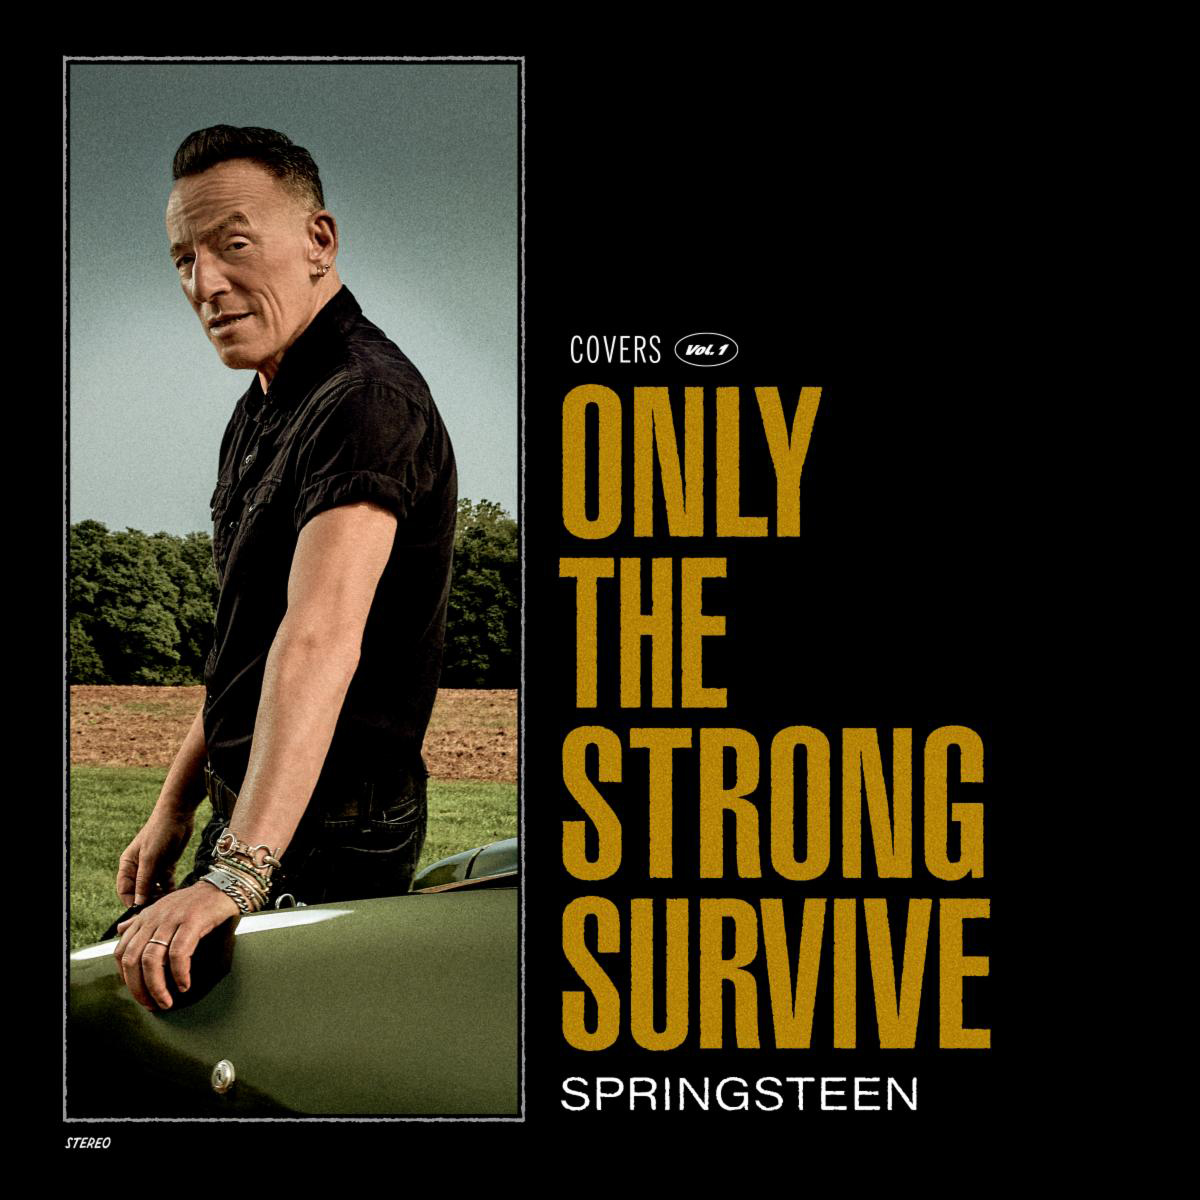 Only The Strong Survive - nowy album studyjny Bruce'a Springsteena.